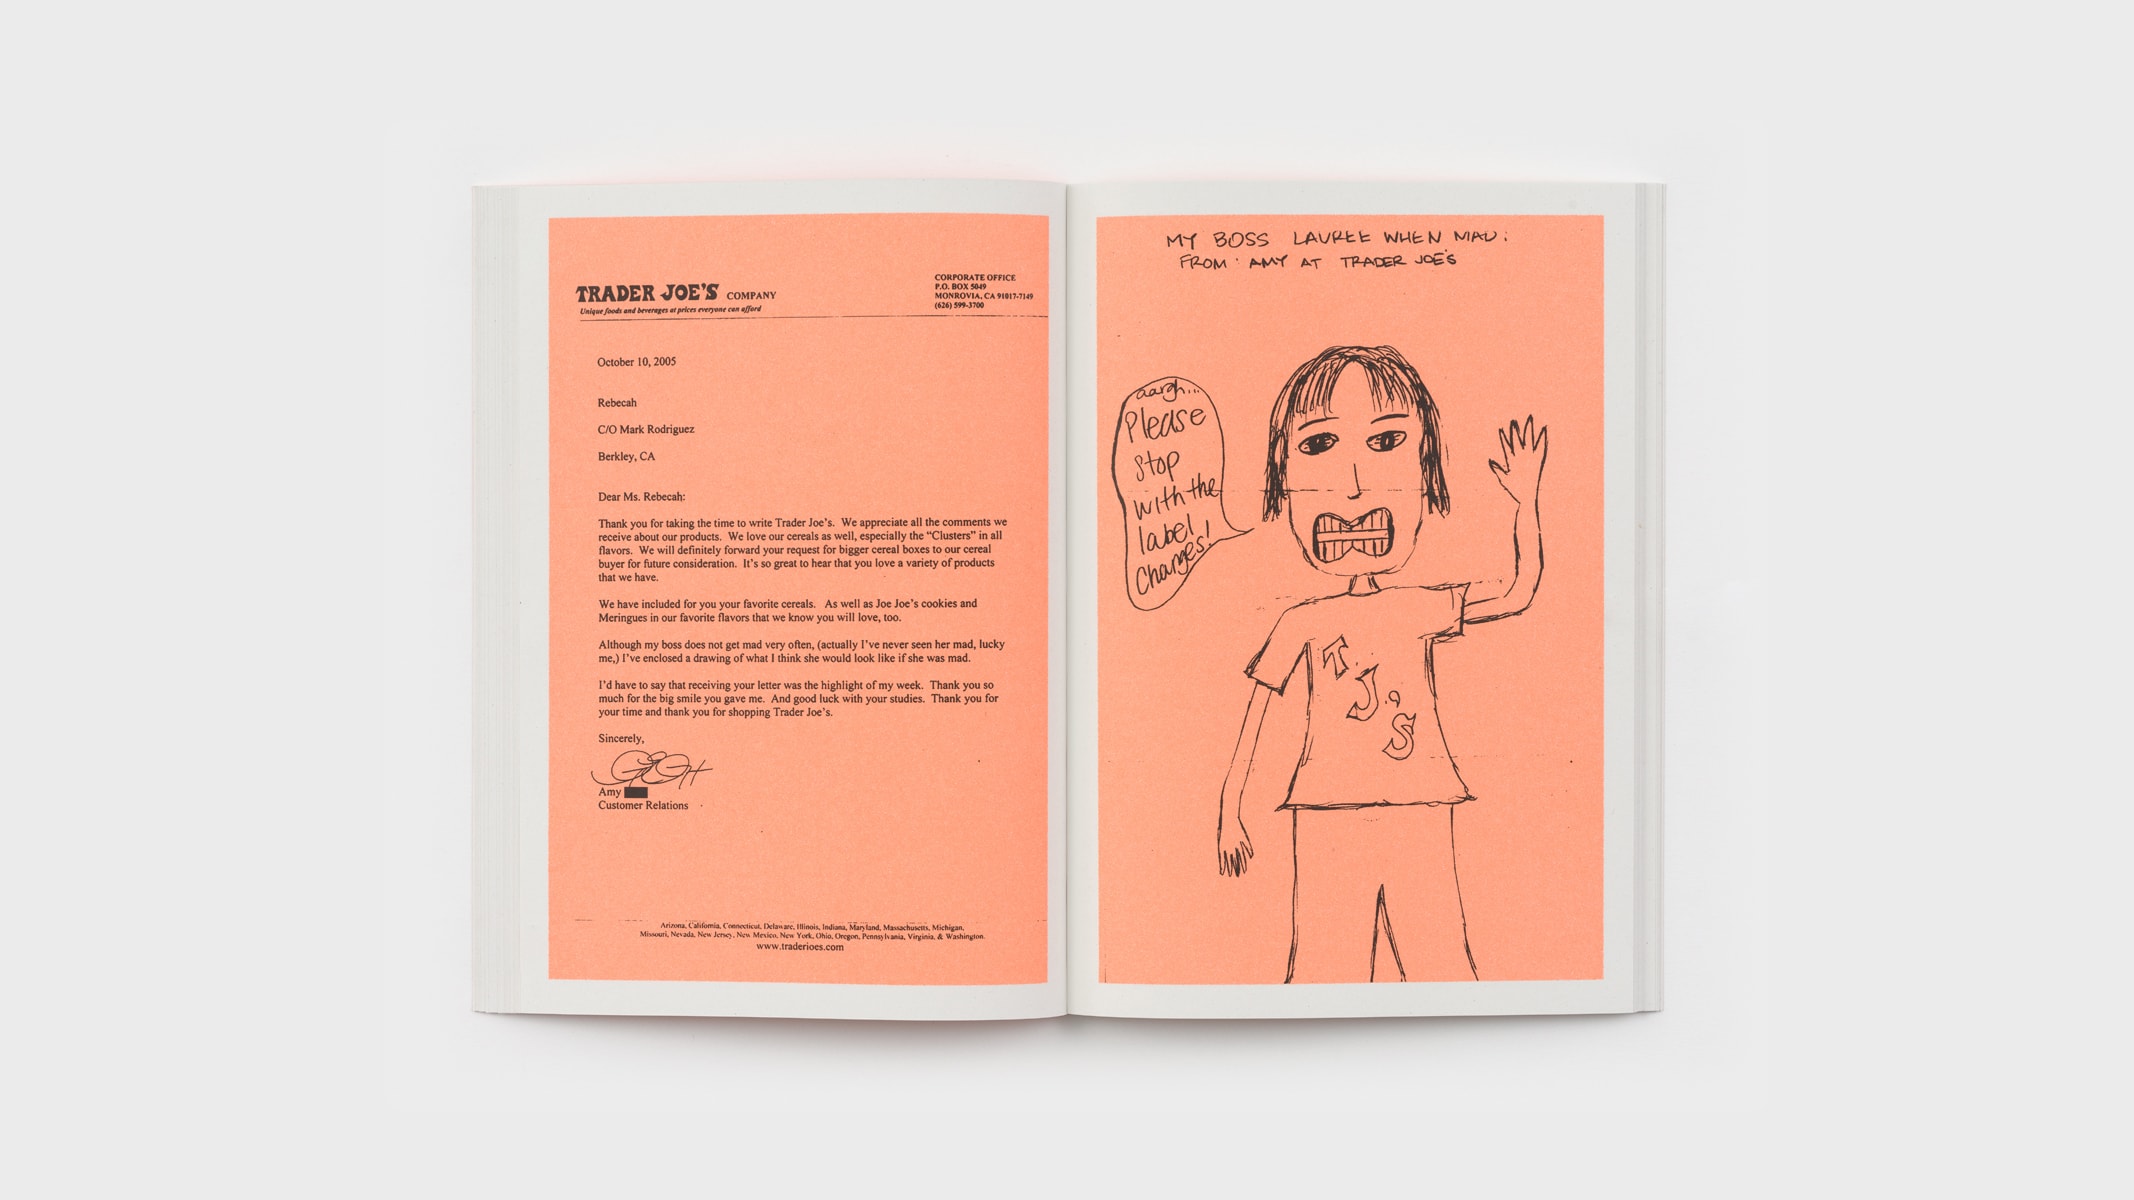 Scans of the response that Mark received from Amy, a Customer Relations employee at Trader Joe's. On the left is her letter, on company letterhead. On the right is a sketch of her boss, Lauree. Lauree doesn't get mad, Amy says, but this is what she would look like if she did.